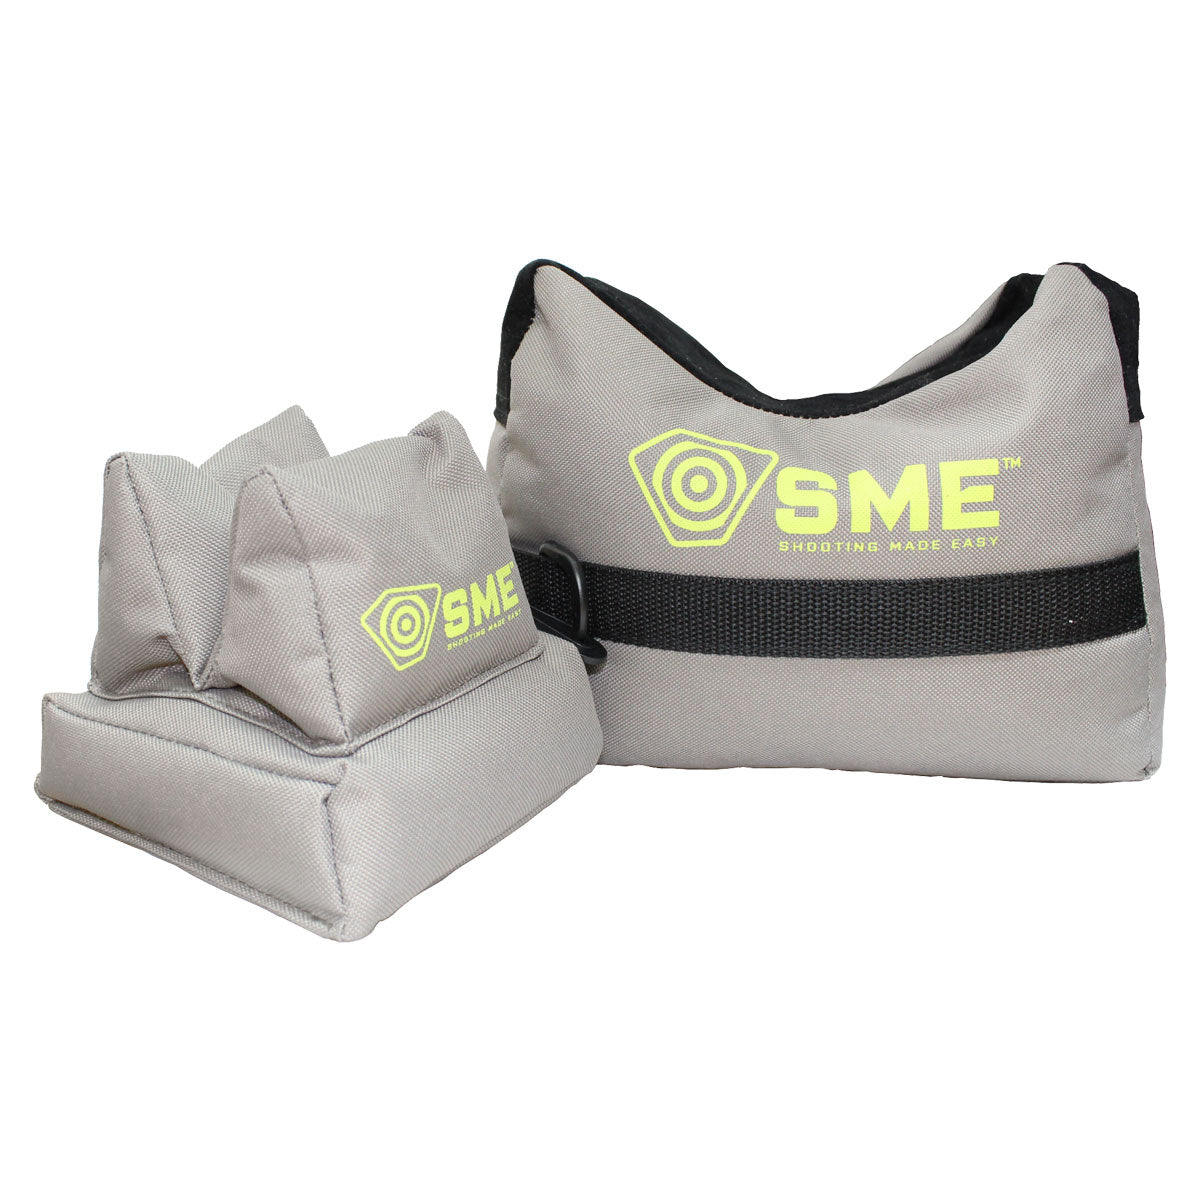 2 PIECE SHOOTING BAGS - FILLED